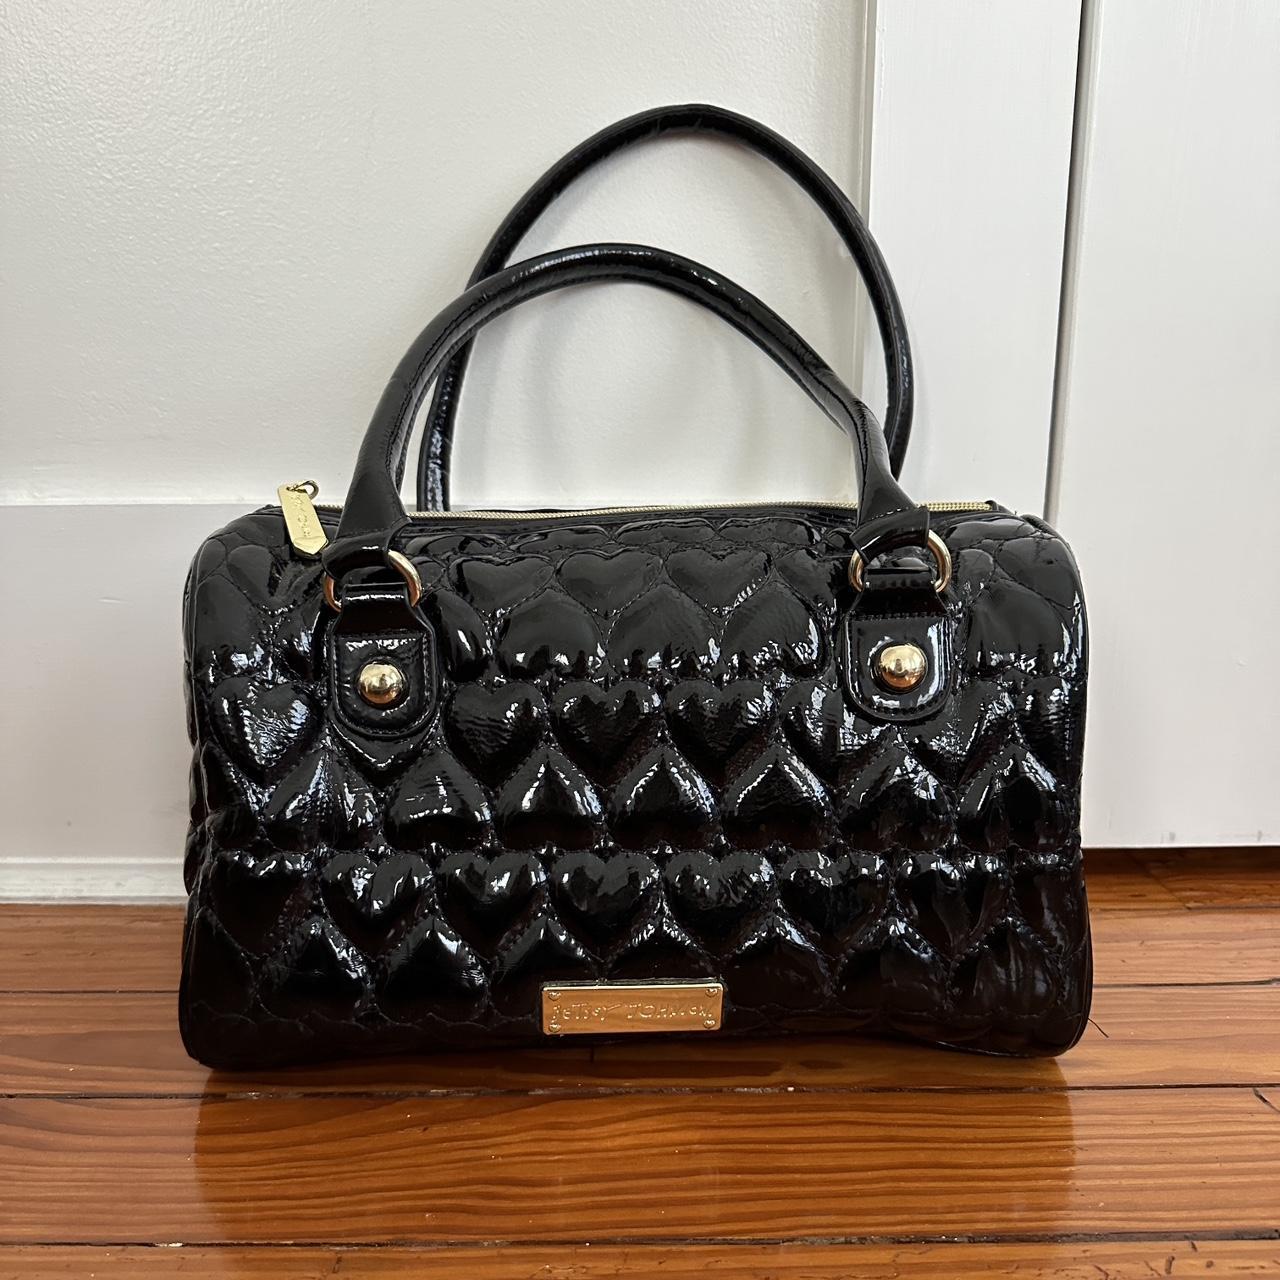 NWOT Betsey Johnson Large Purse/Bag Off-White and Black with Gold Chains |  Large purses, Betsey, Purses